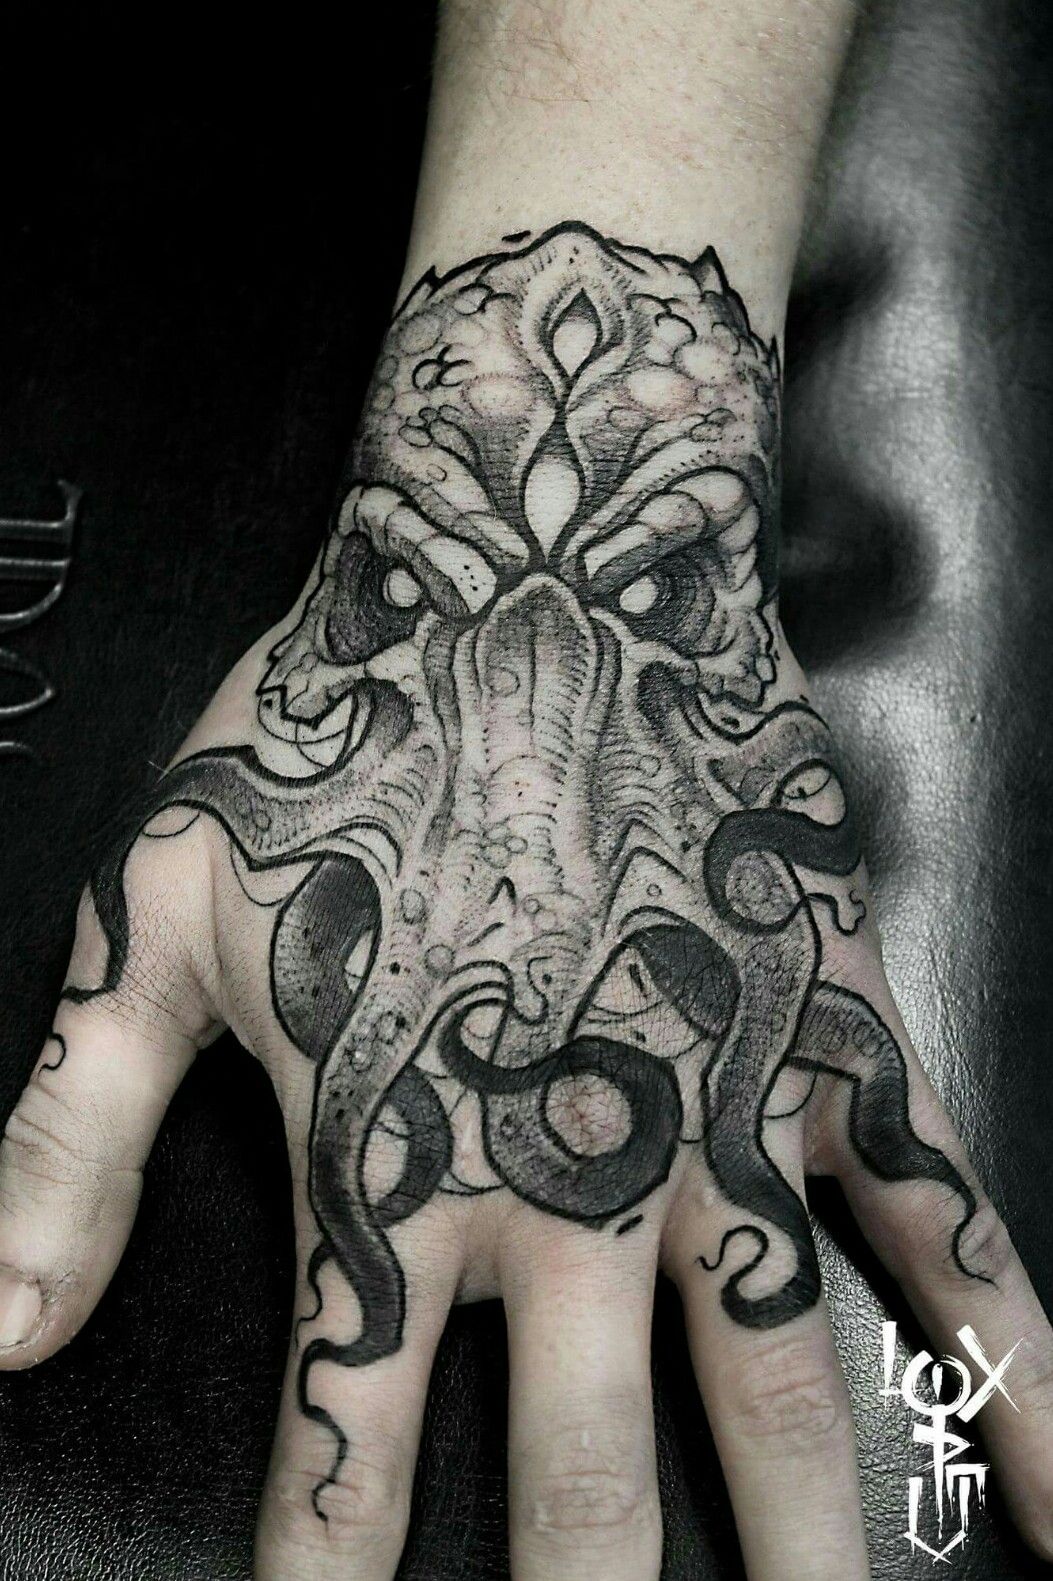 Squid Fingers  Hand tattoos for guys Hand tattoos Tattoo designs